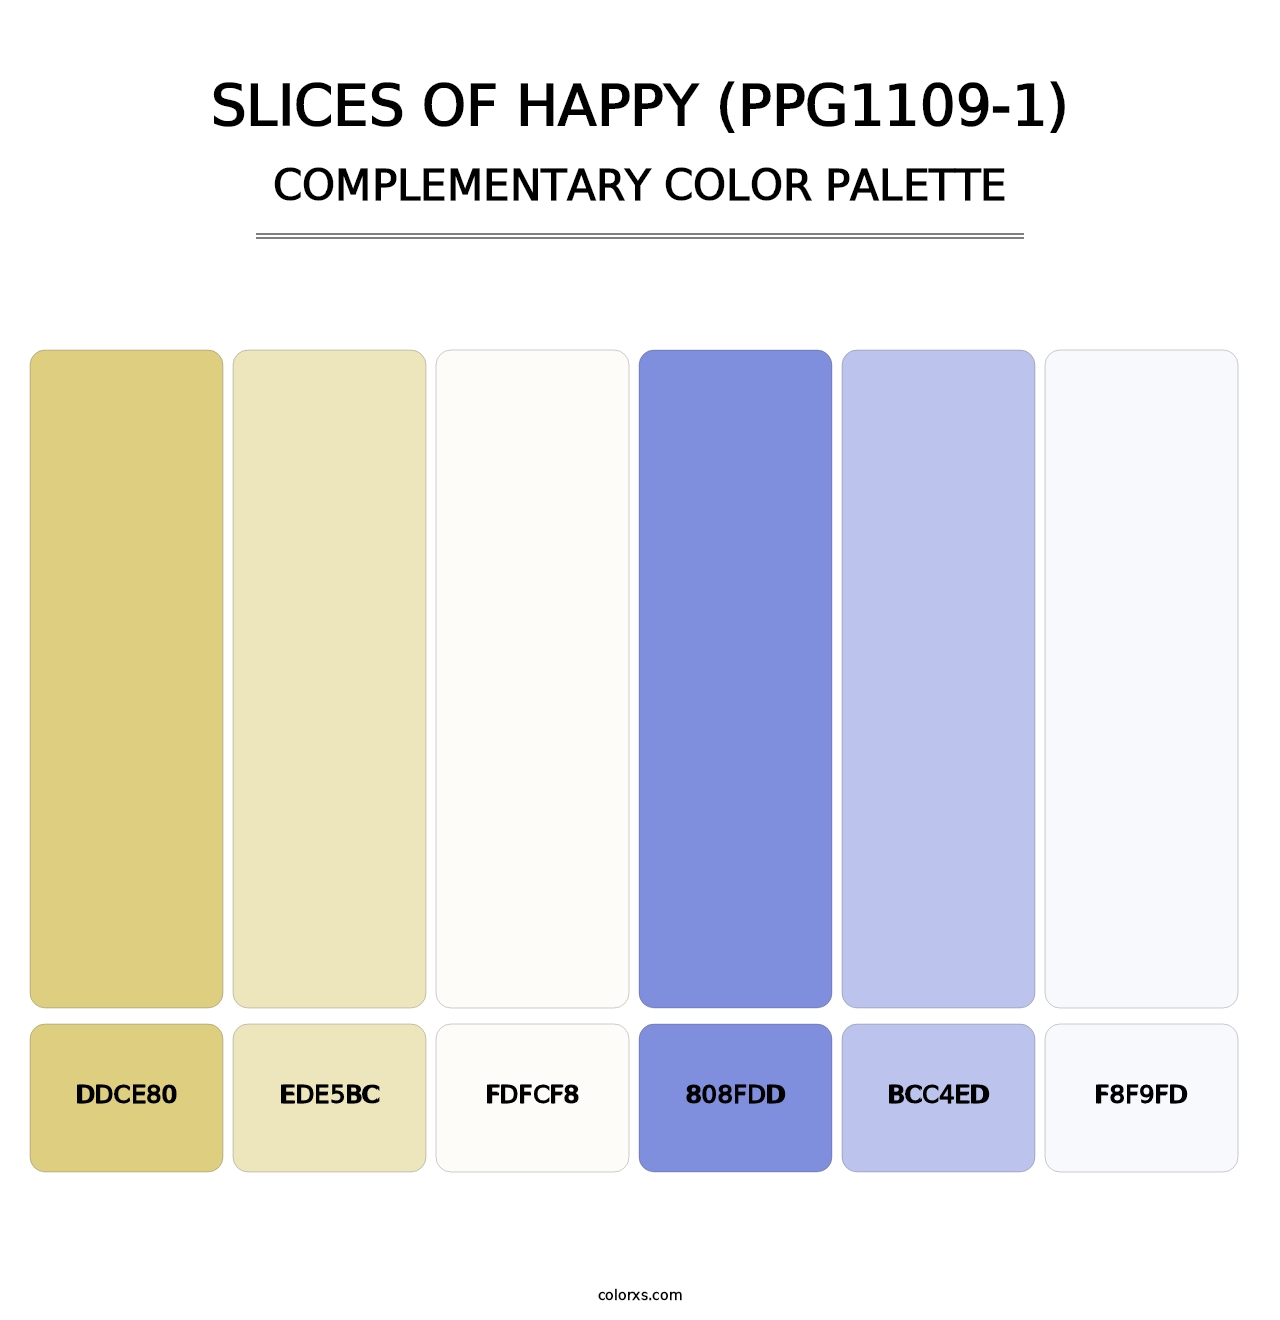 Slices Of Happy (PPG1109-1) - Complementary Color Palette